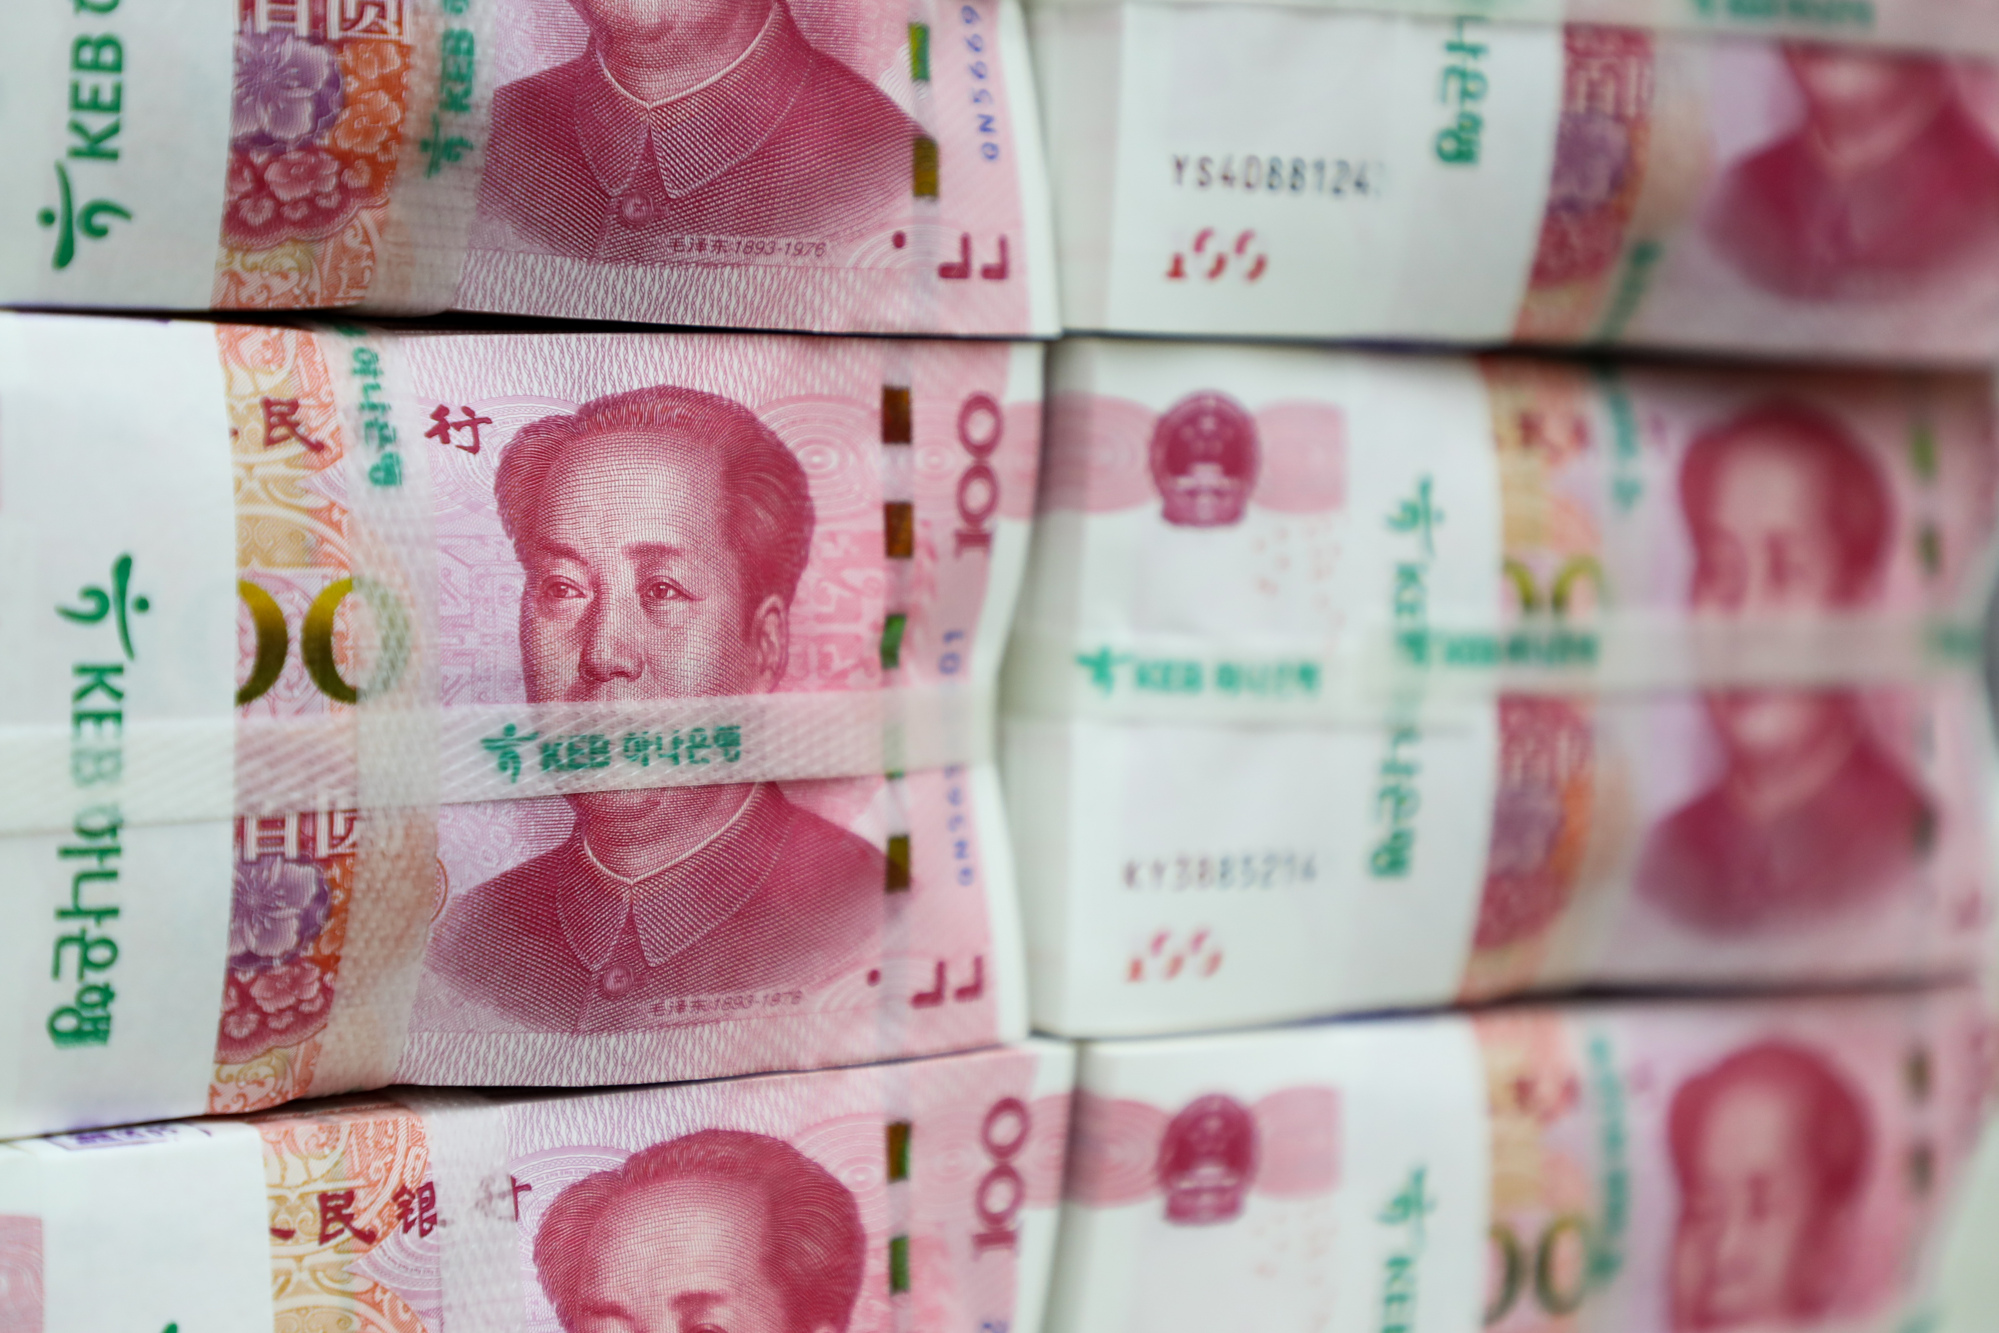 China's Yuan Sinks With Bonds as Stocks Rally on Easing Signs